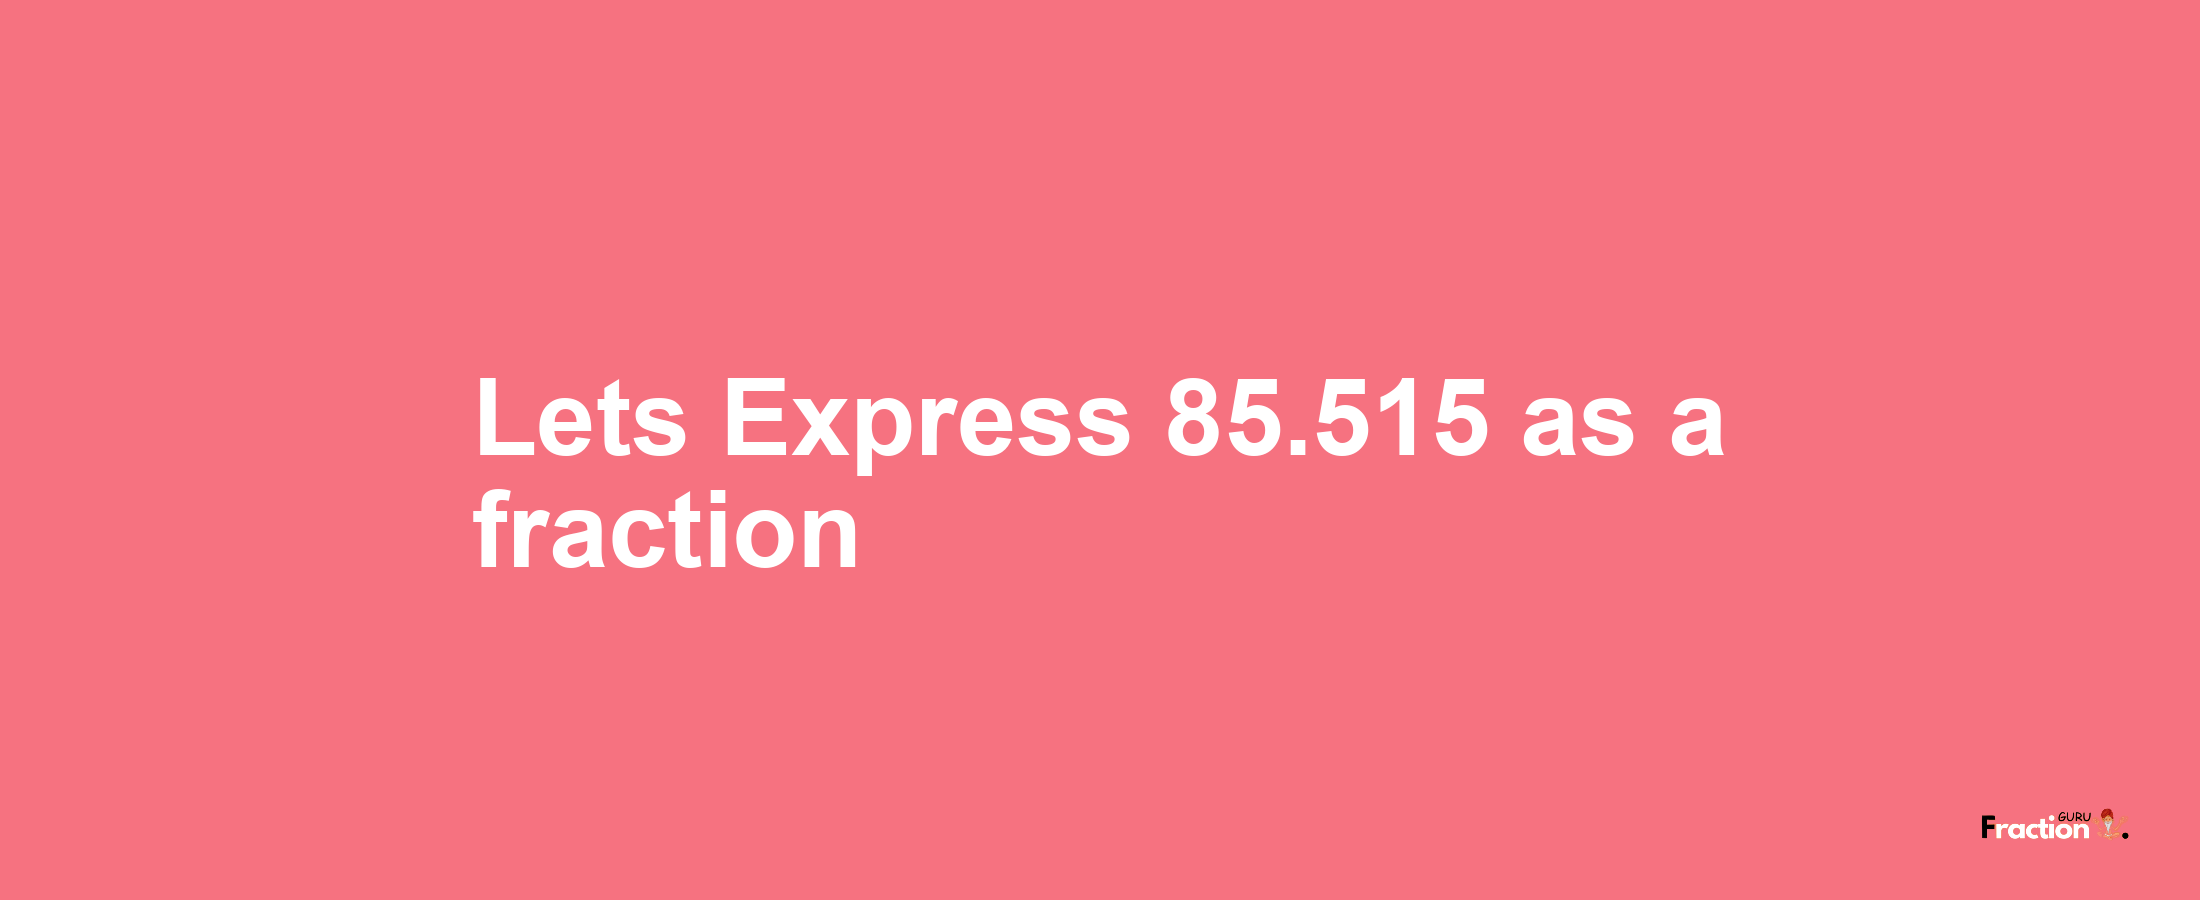 Lets Express 85.515 as afraction